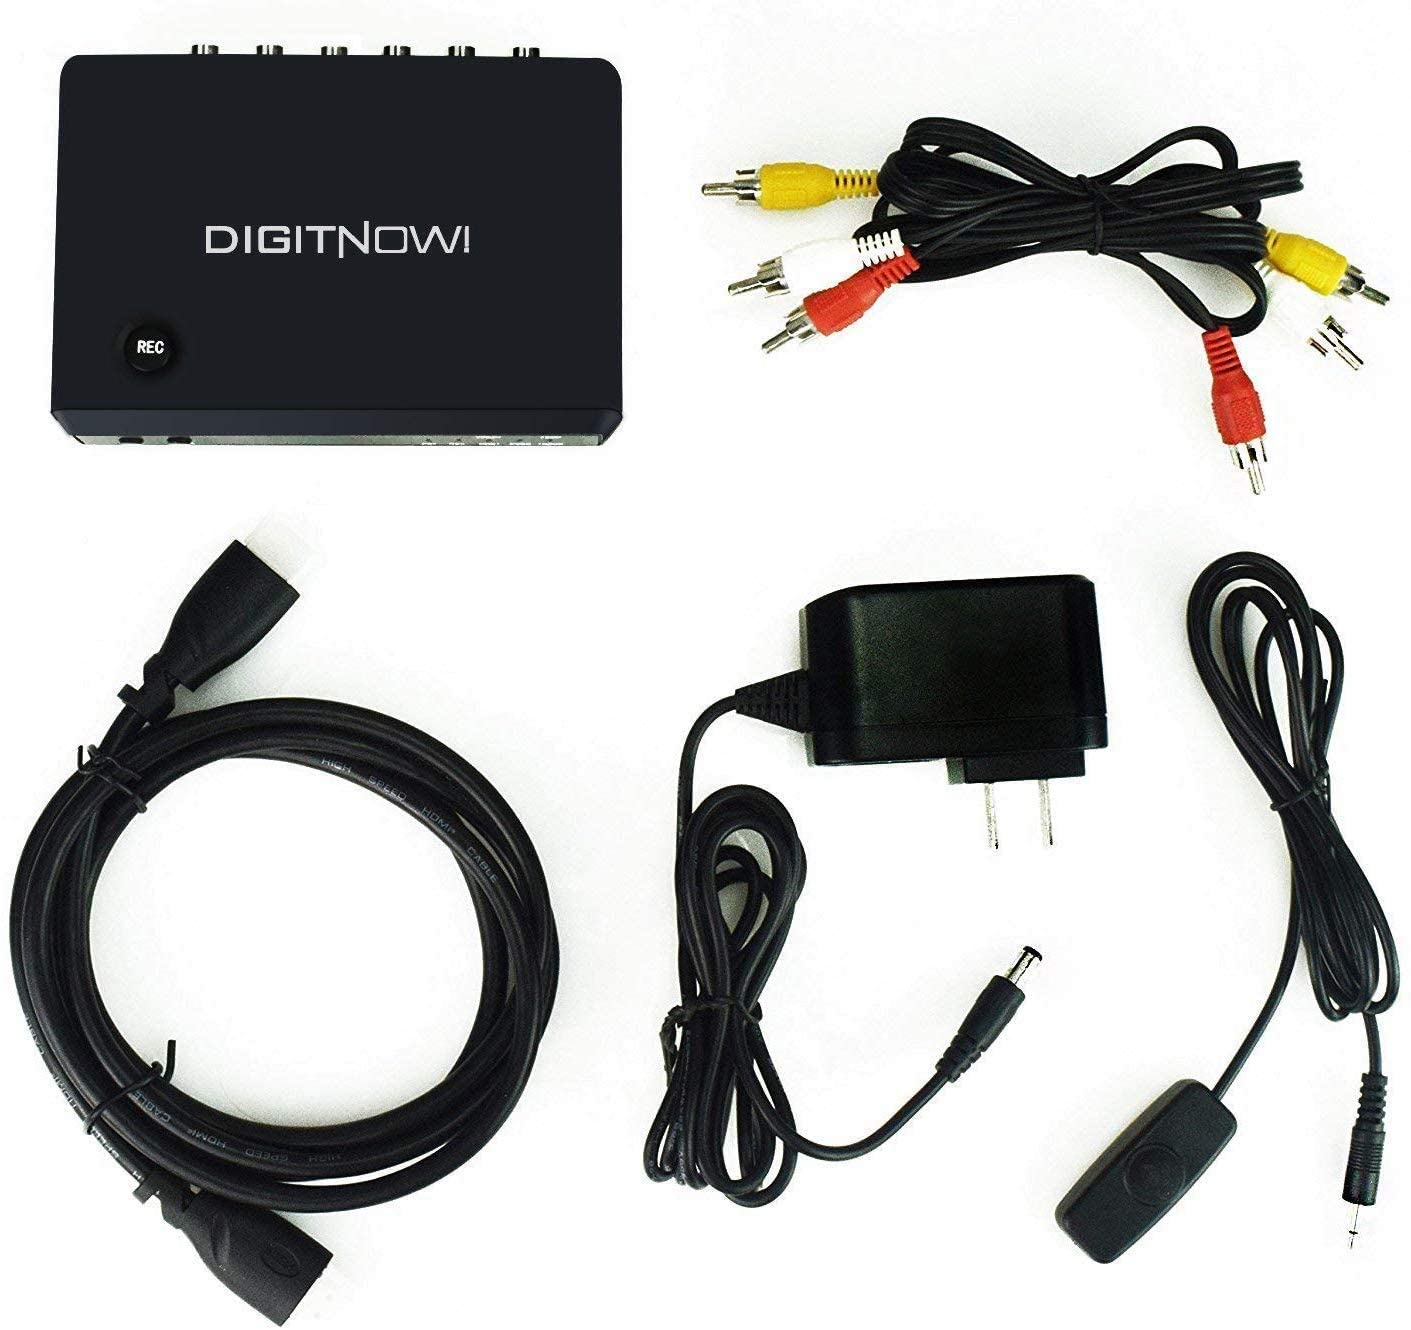 HD Video Converter for PS4 Support HDMI/YPbPr/CVBS Input and HDMI Output,Full HD 1080p 30fps